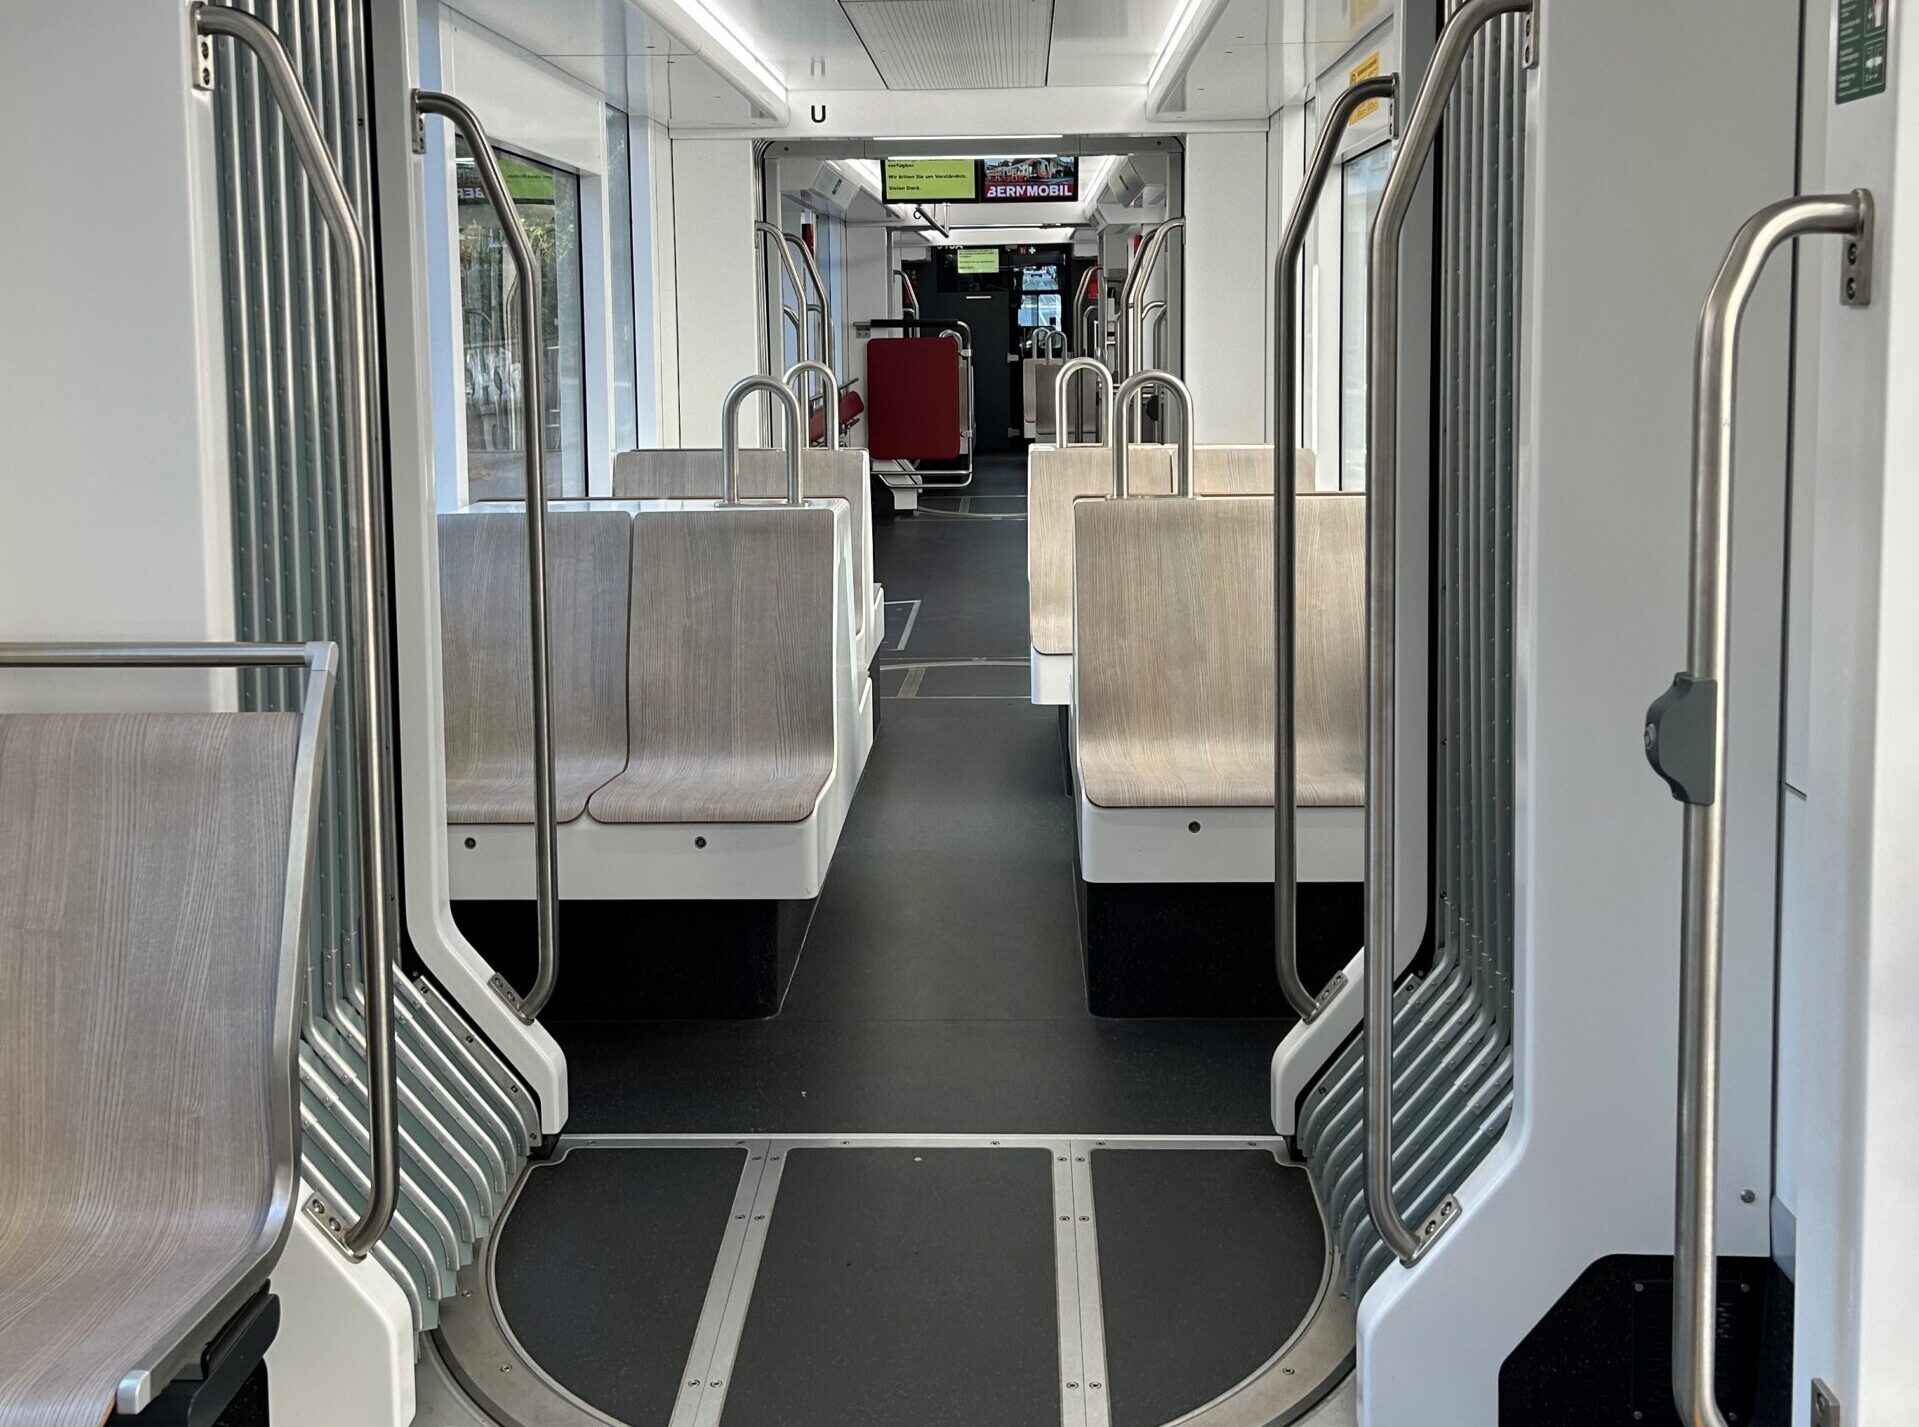 The interior of the new vehicle